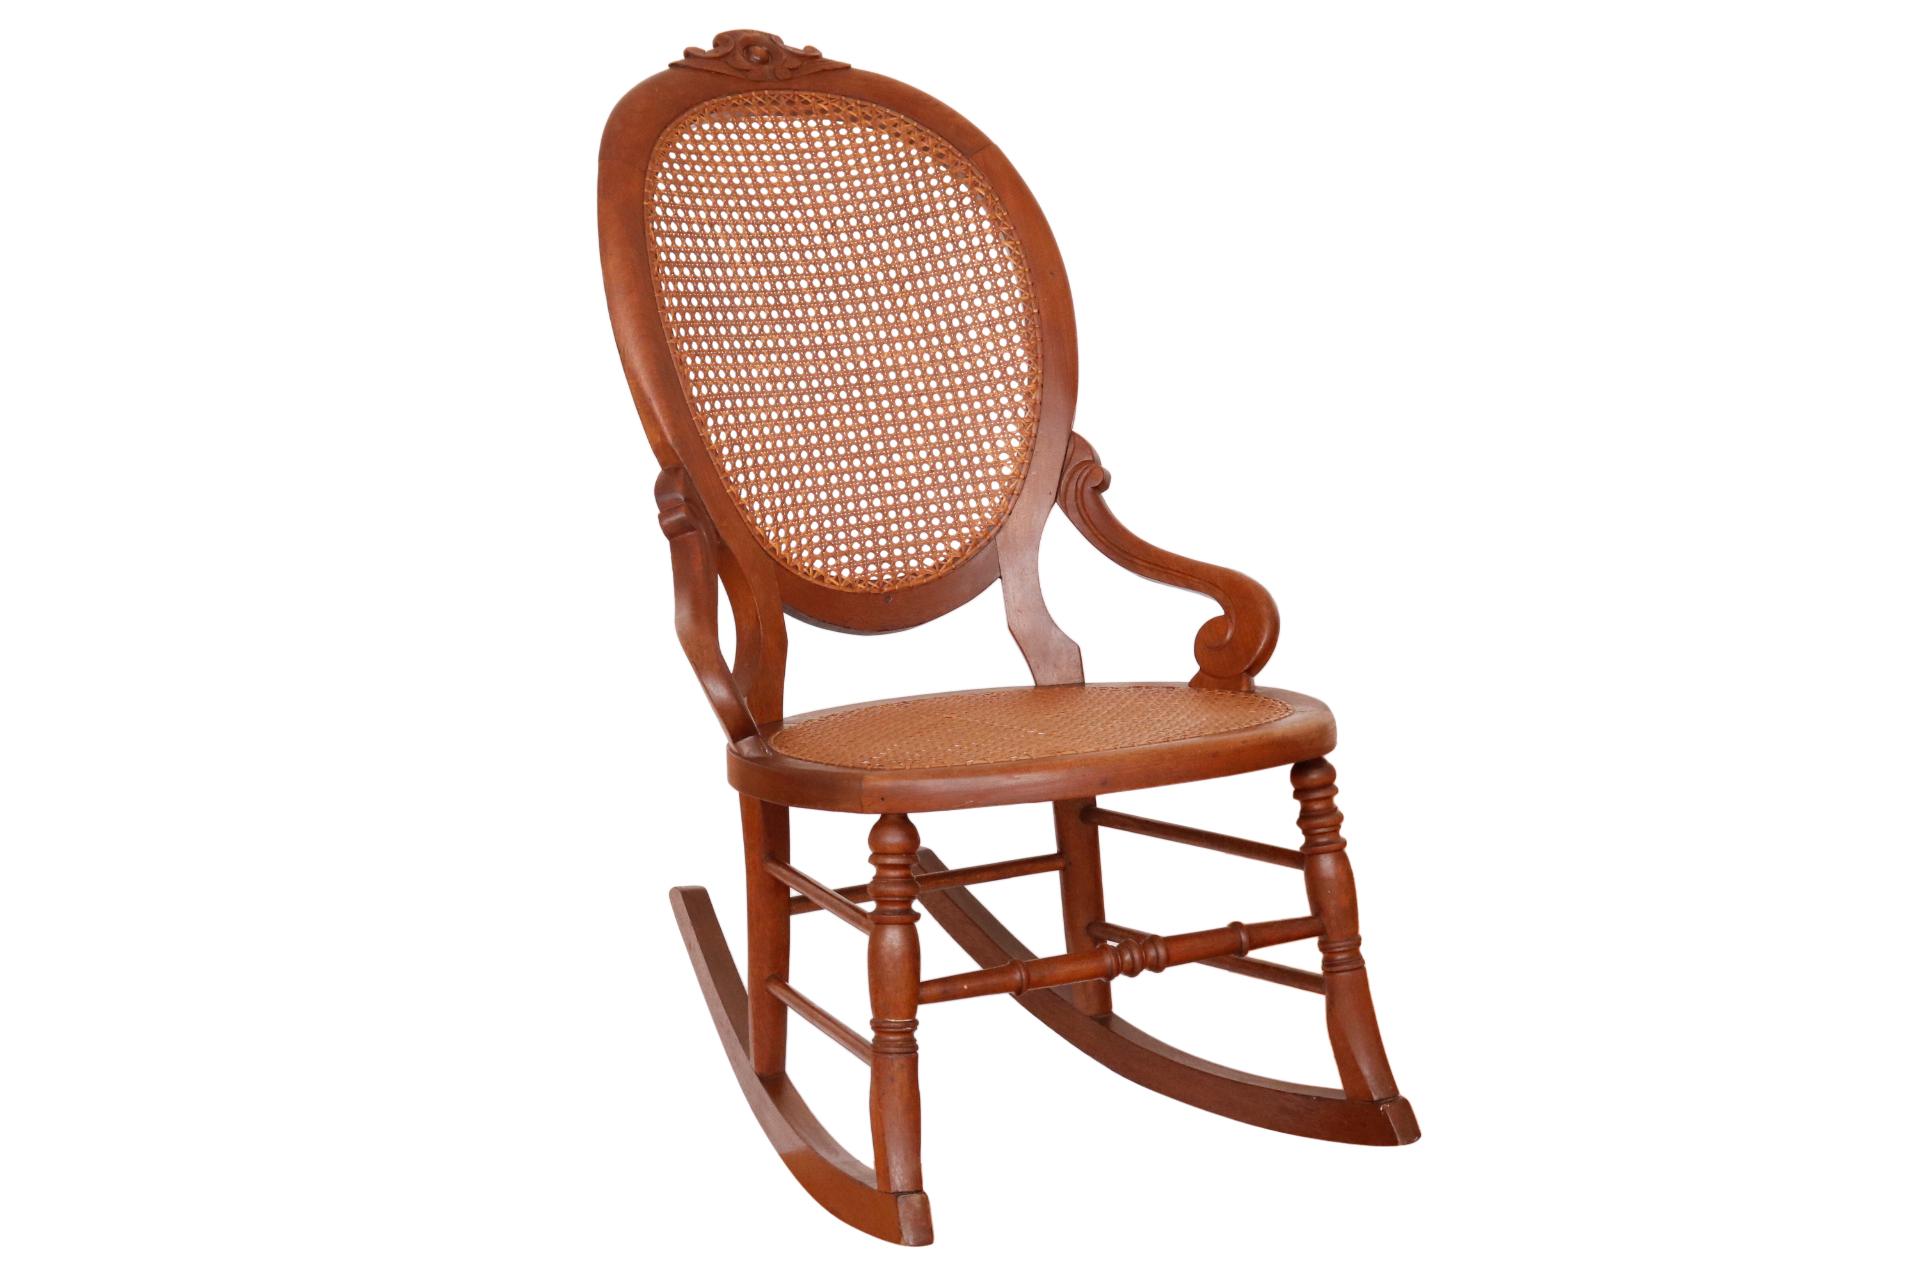 An antique caned rocking chair. The chair has a caned balloon back carved on the crest with a simple flower. Outward flowing arm like supports scroll at the seat. Turned legs are connected with a box stretcher and finish with gently curved rockers.